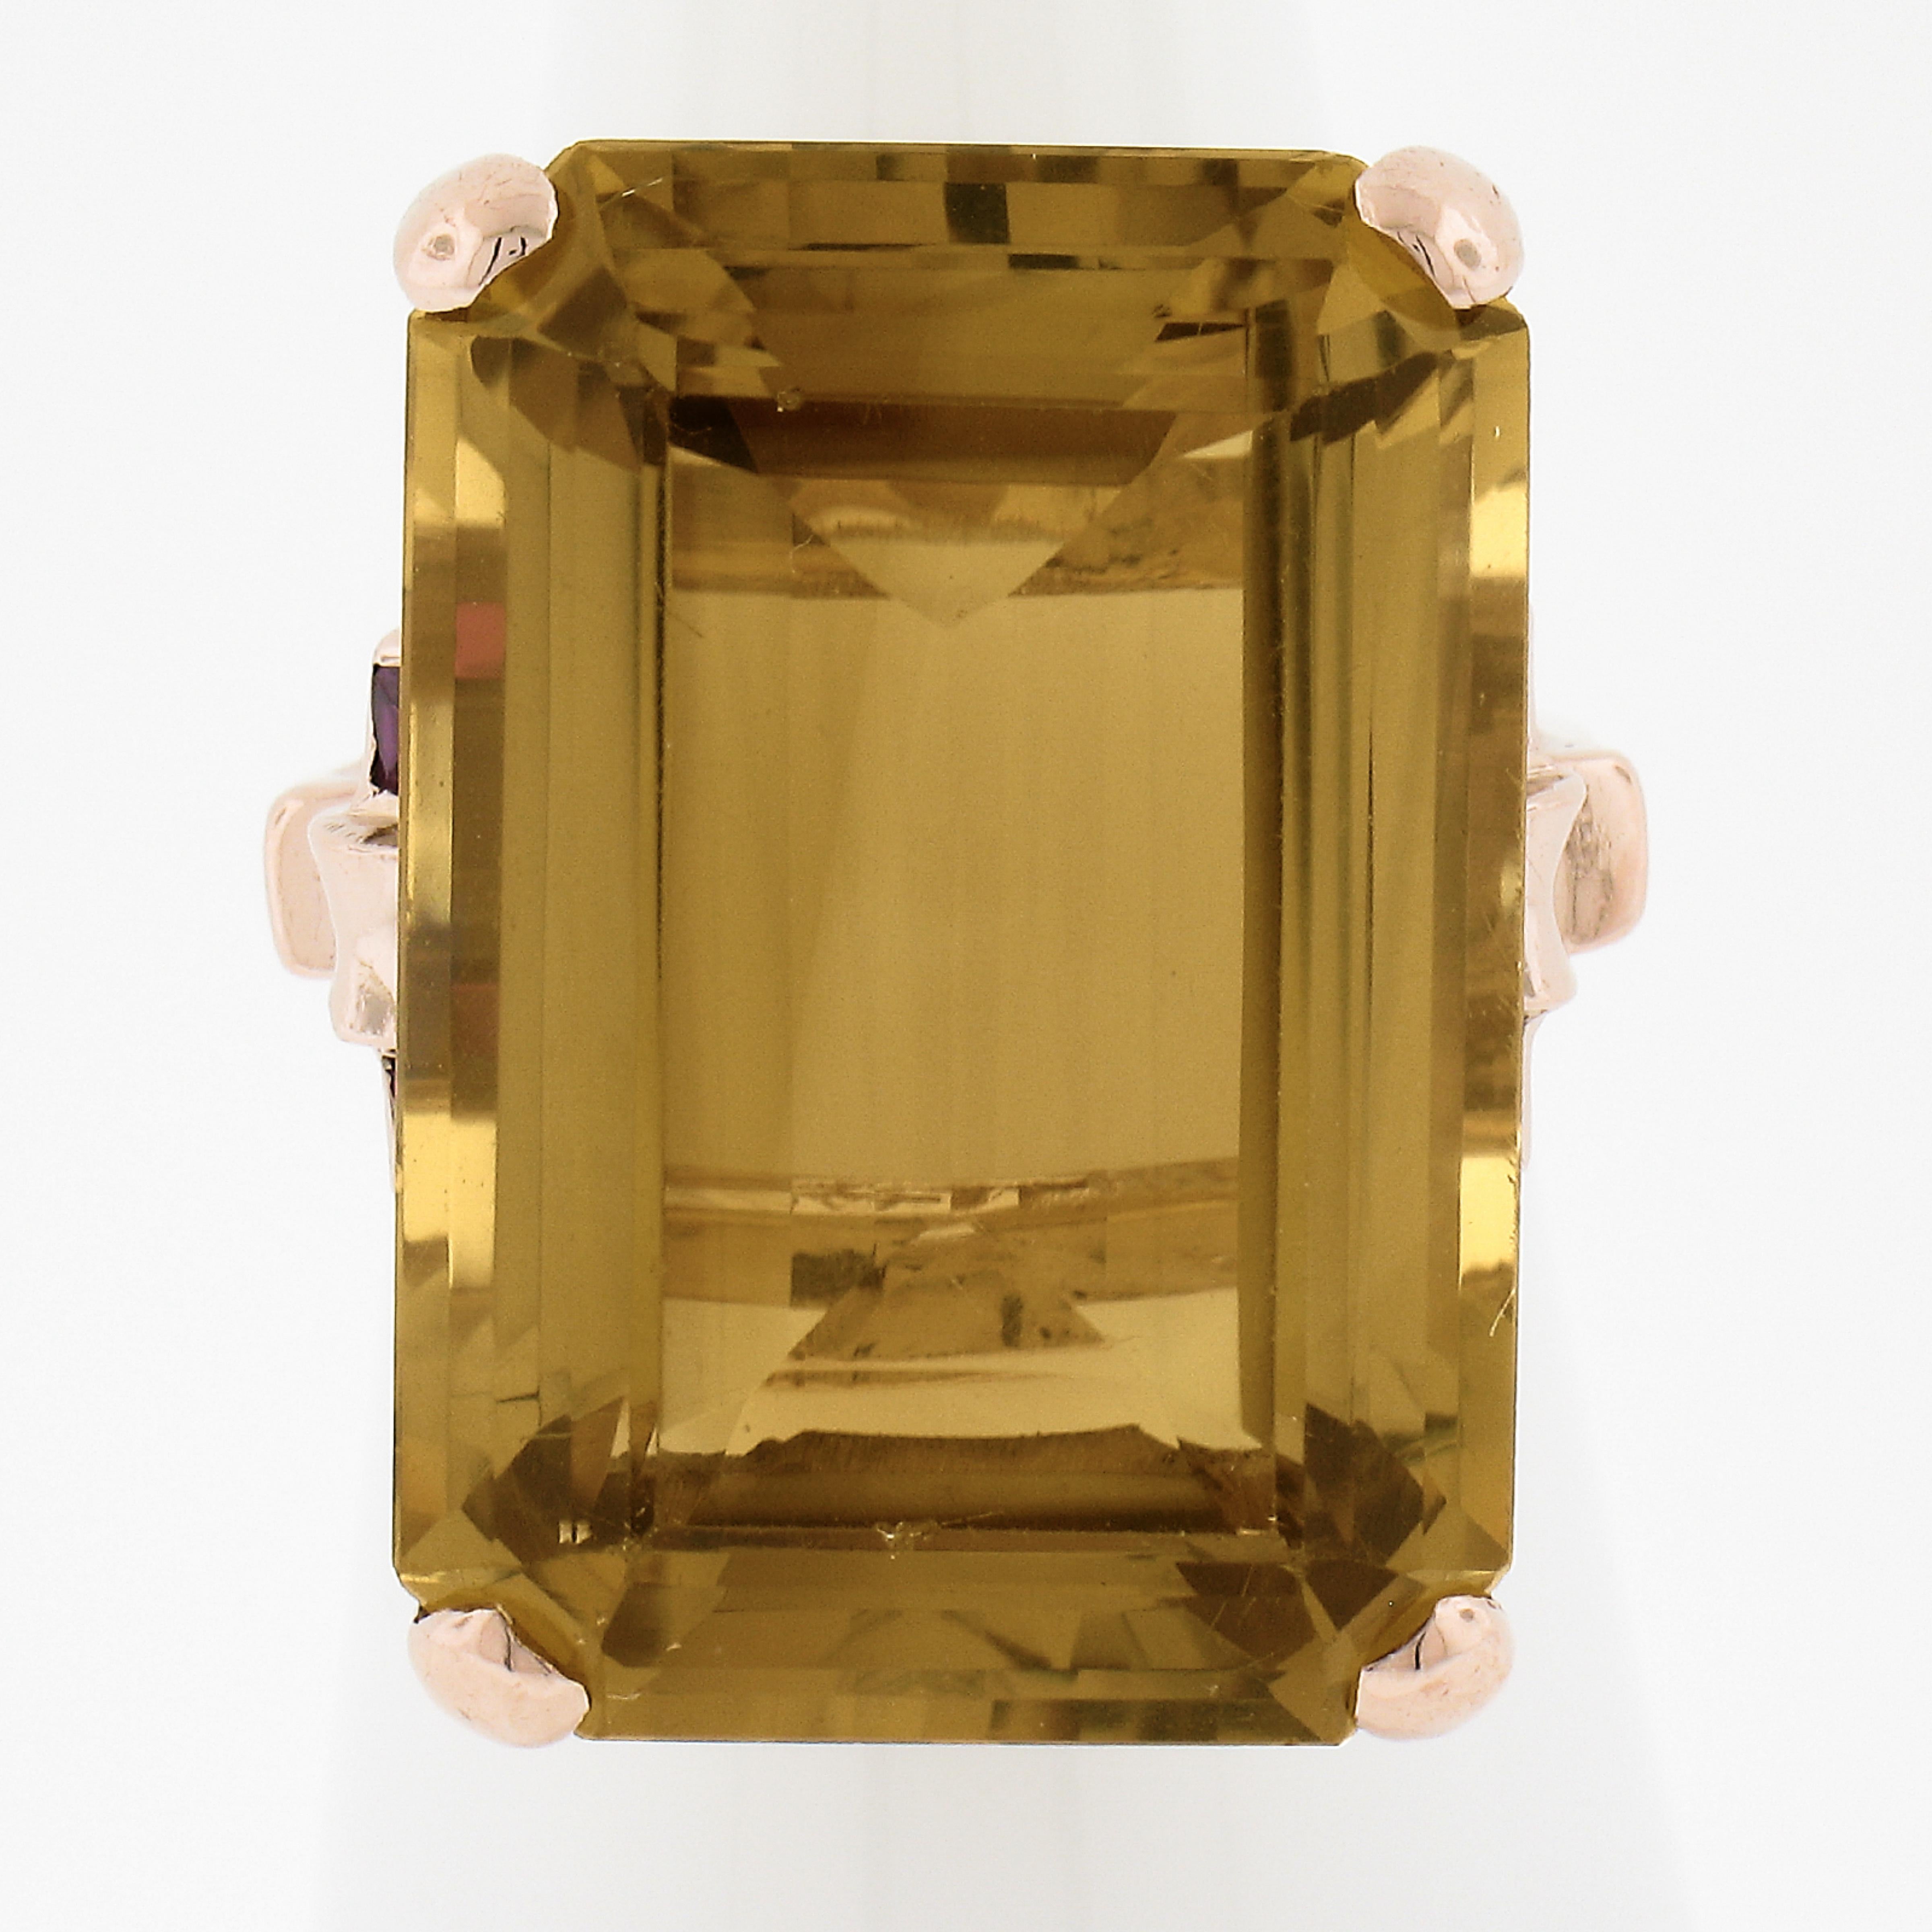 --Stone(s):--
(1) Natural Genuine Citrine - Octagonal Step Cut - Prong Set - Orangy Yellow Color - 25ct (approx. based on the certification) ** See Certification Details Below for Complete Info **
(4) Synthetic Rubies - Square Step Cut - Bezel Set -